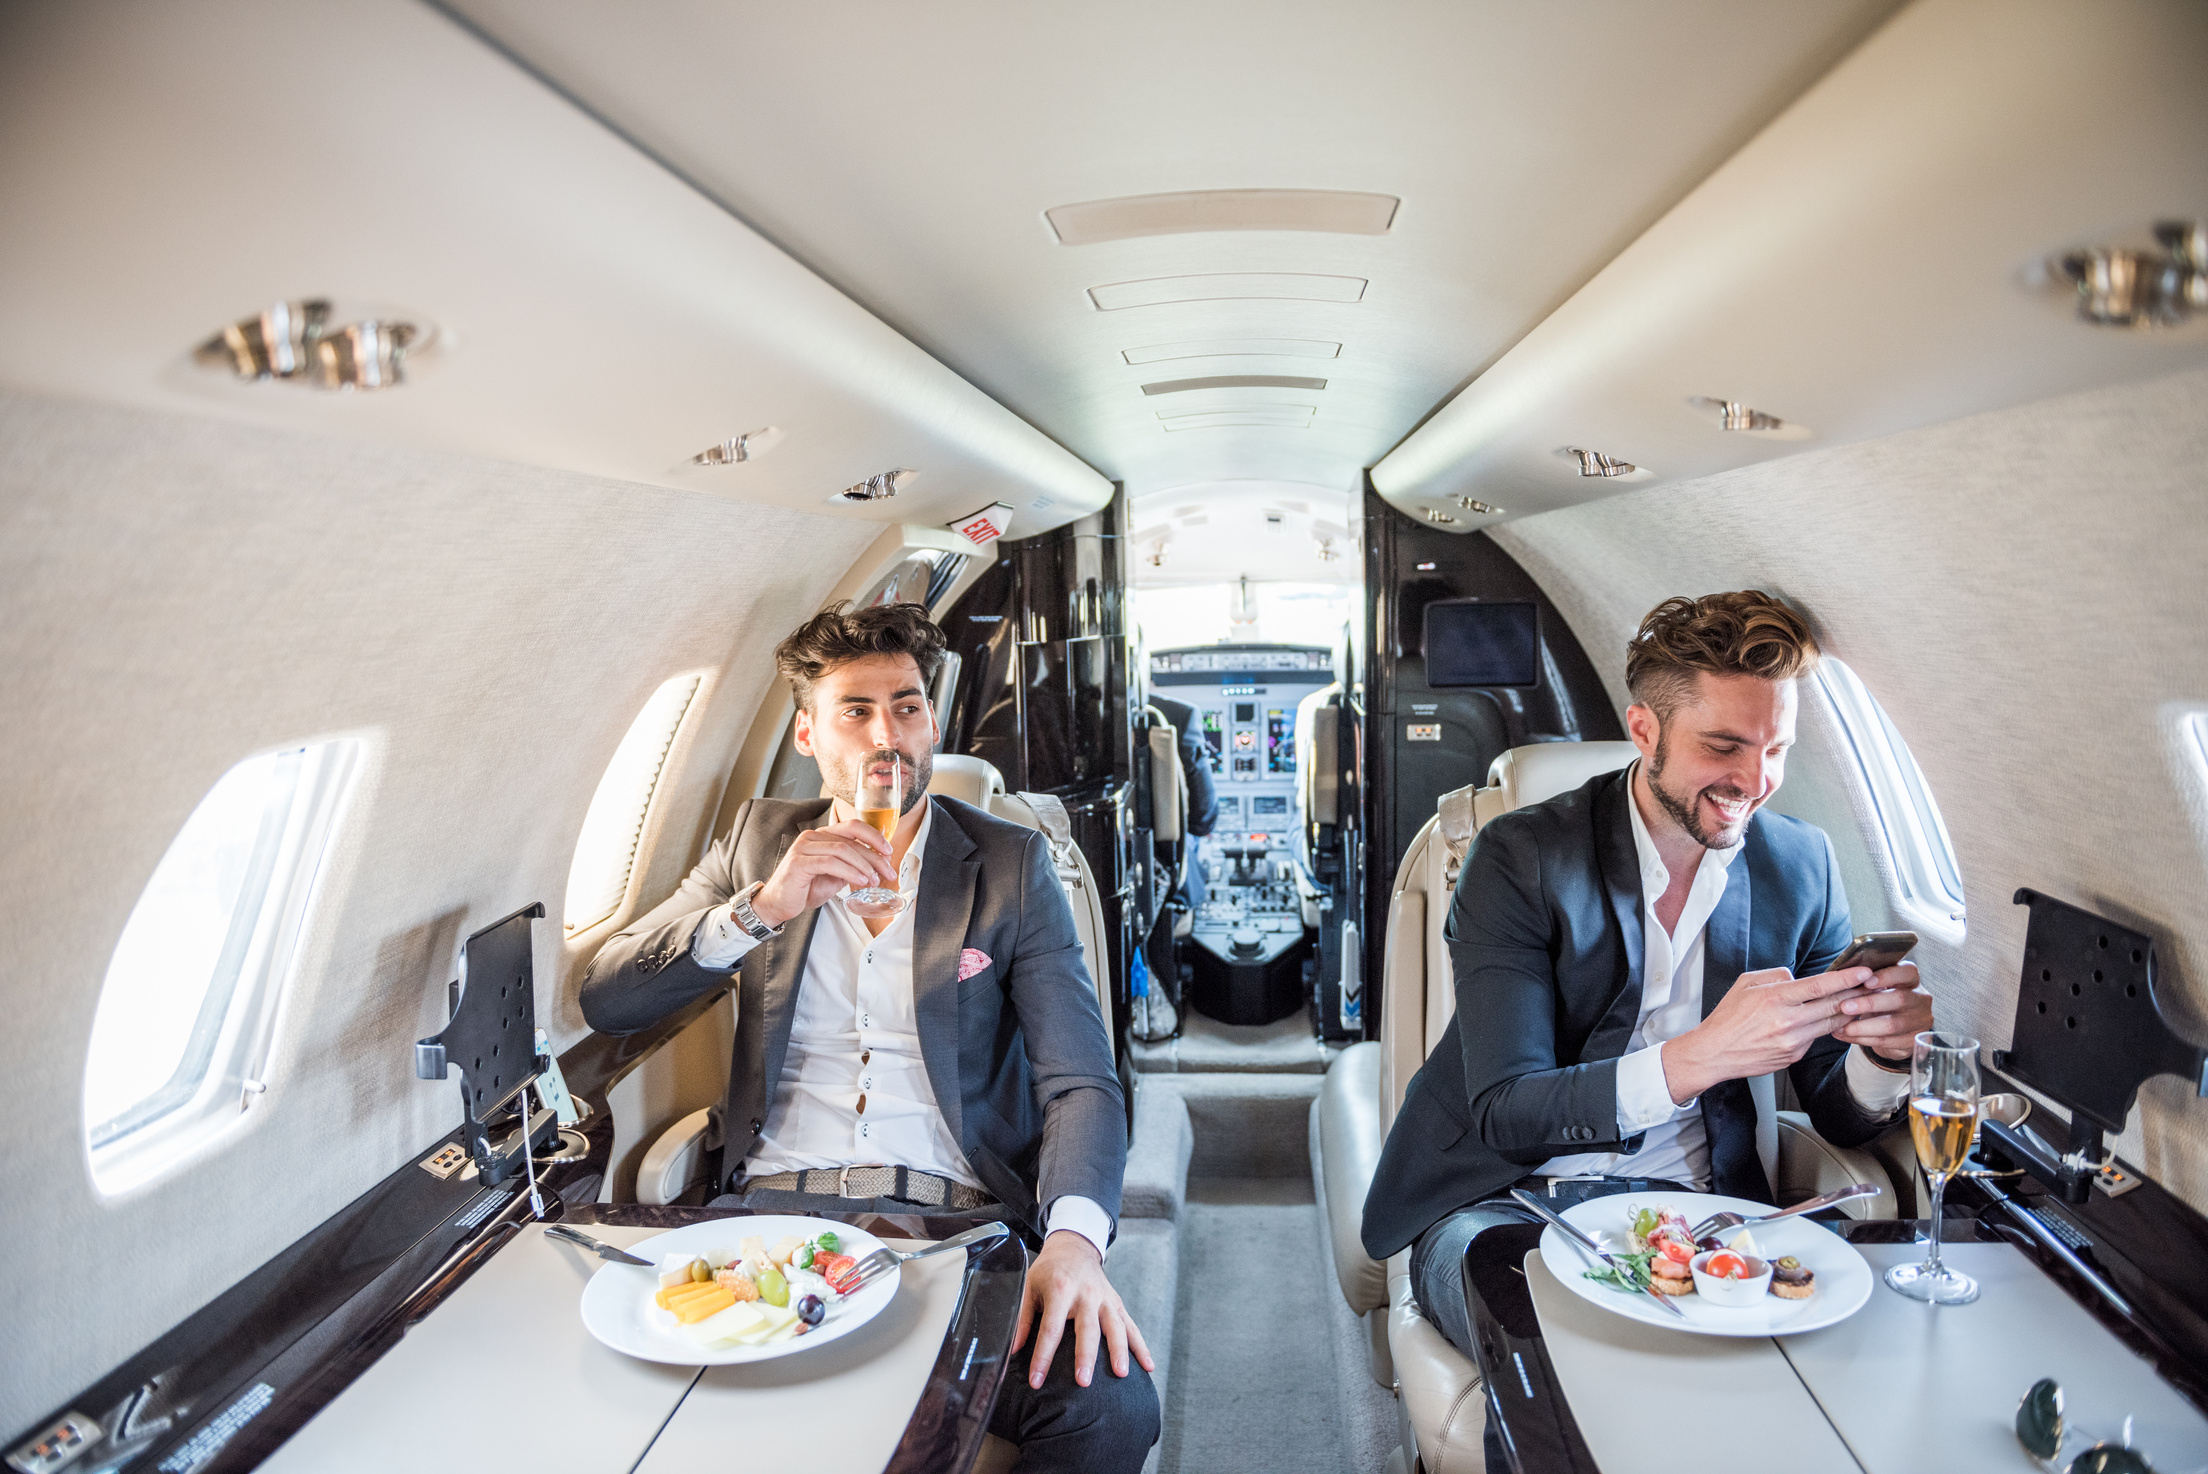 Business trip by luxury jet
Discover the cultures of the most fascinating places in the world
and wonders on extraordinary tours and trips with the convenience of exclusive transportation